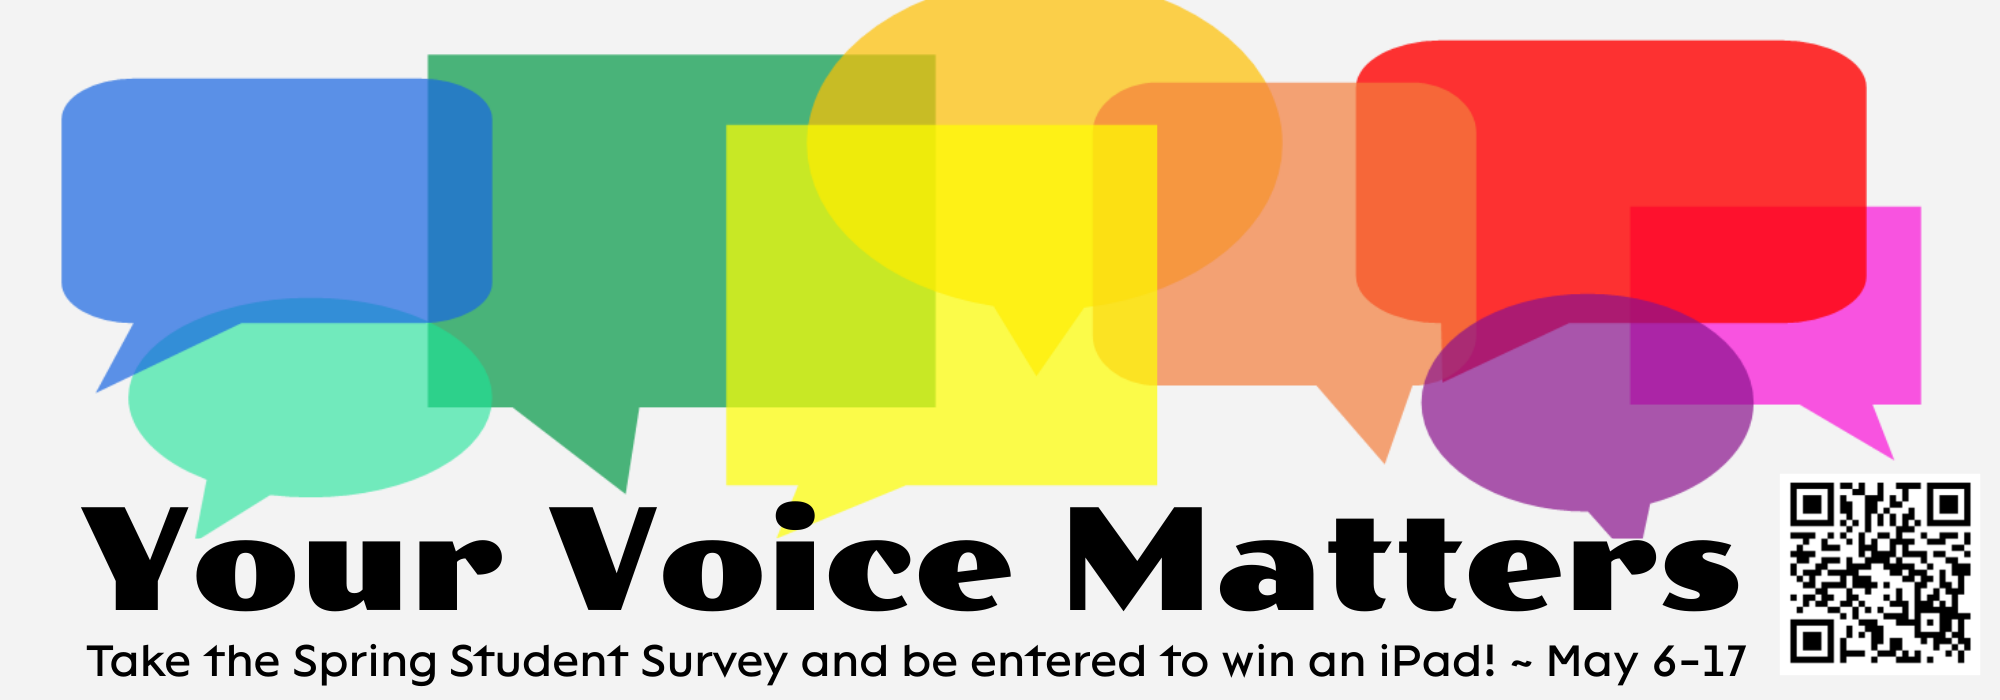 Your Voice Matters. Take the Spring Student Survey and be entered to min an iPad! May 6-17